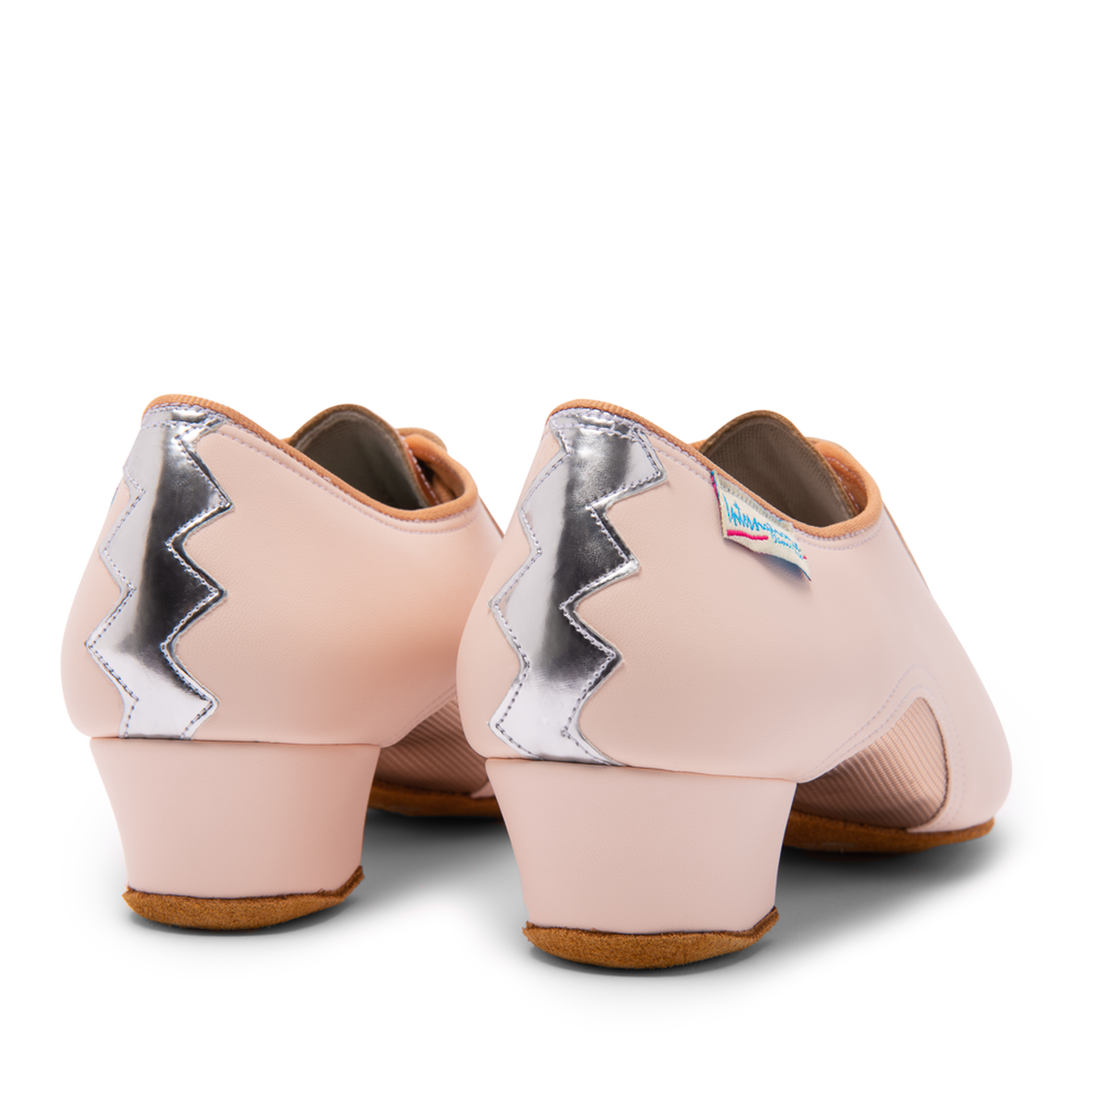 International Dance Shoes Himalayan Rose Practice Shoe with Metallic Rose Gold Accents Artiste SS_SALE